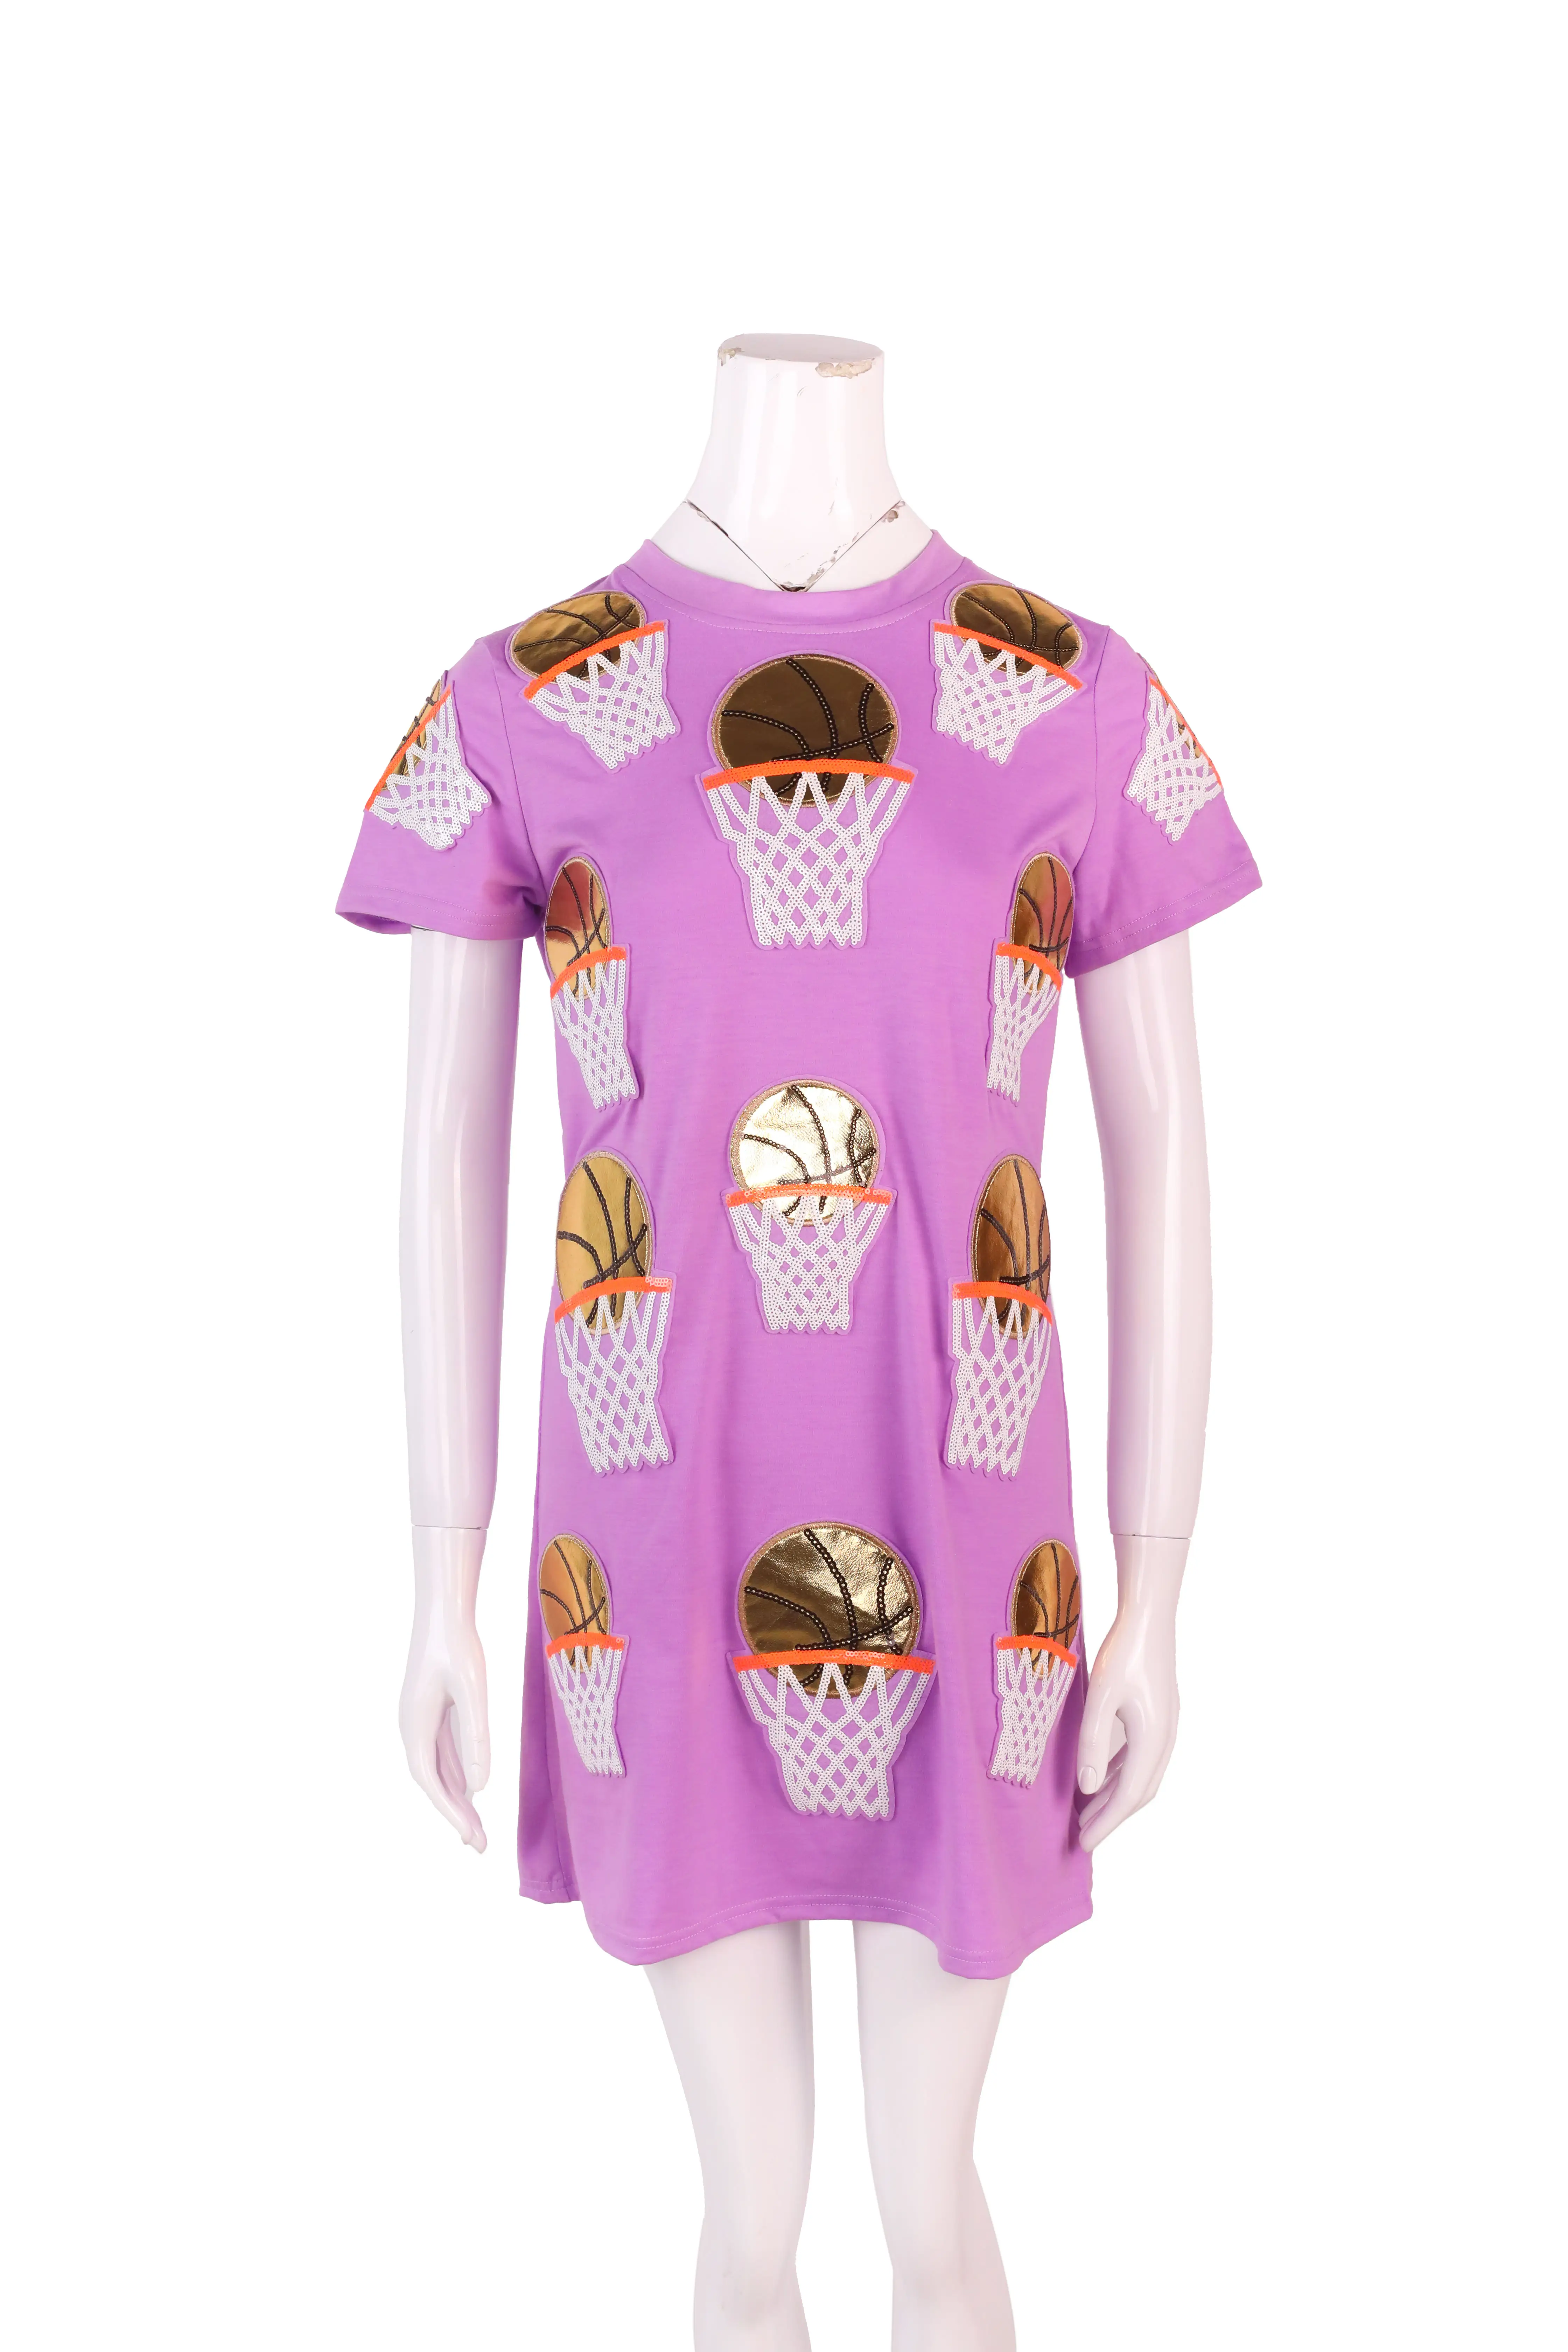 Loveda Wholesale Game Day Sequin Dresses Custom O Neck Short Sleeve Causal Tshirt Dress With Basketball Sequin Patch